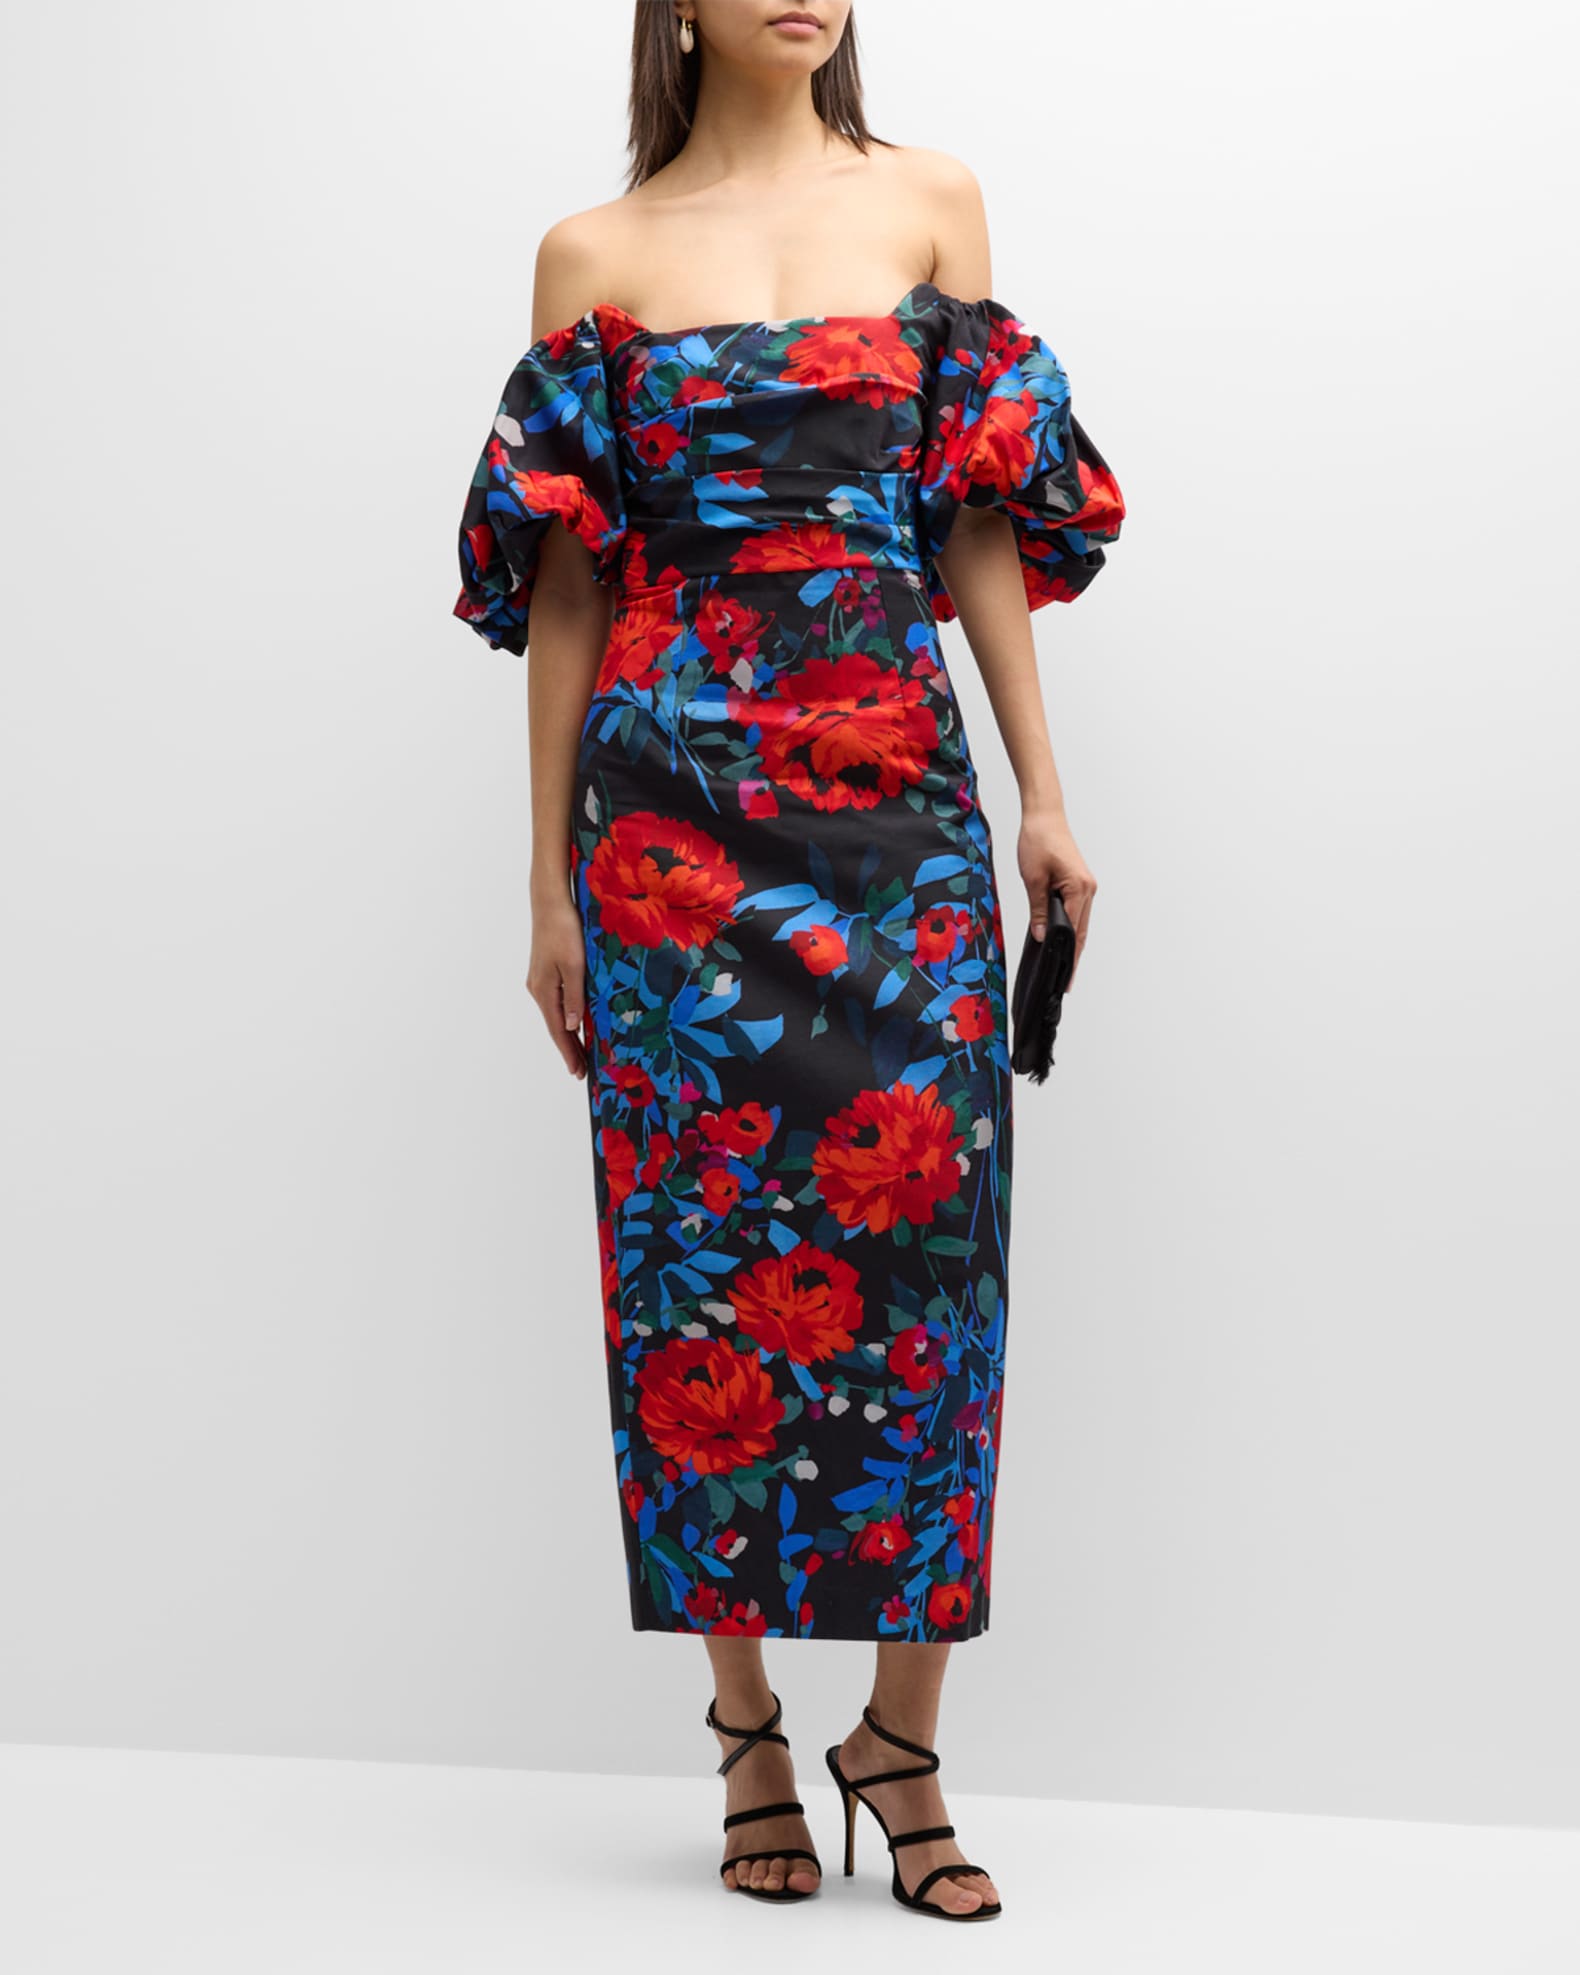 Lela Rose Floral Print Midi Dress with Puff Sleeves | Neiman Marcus